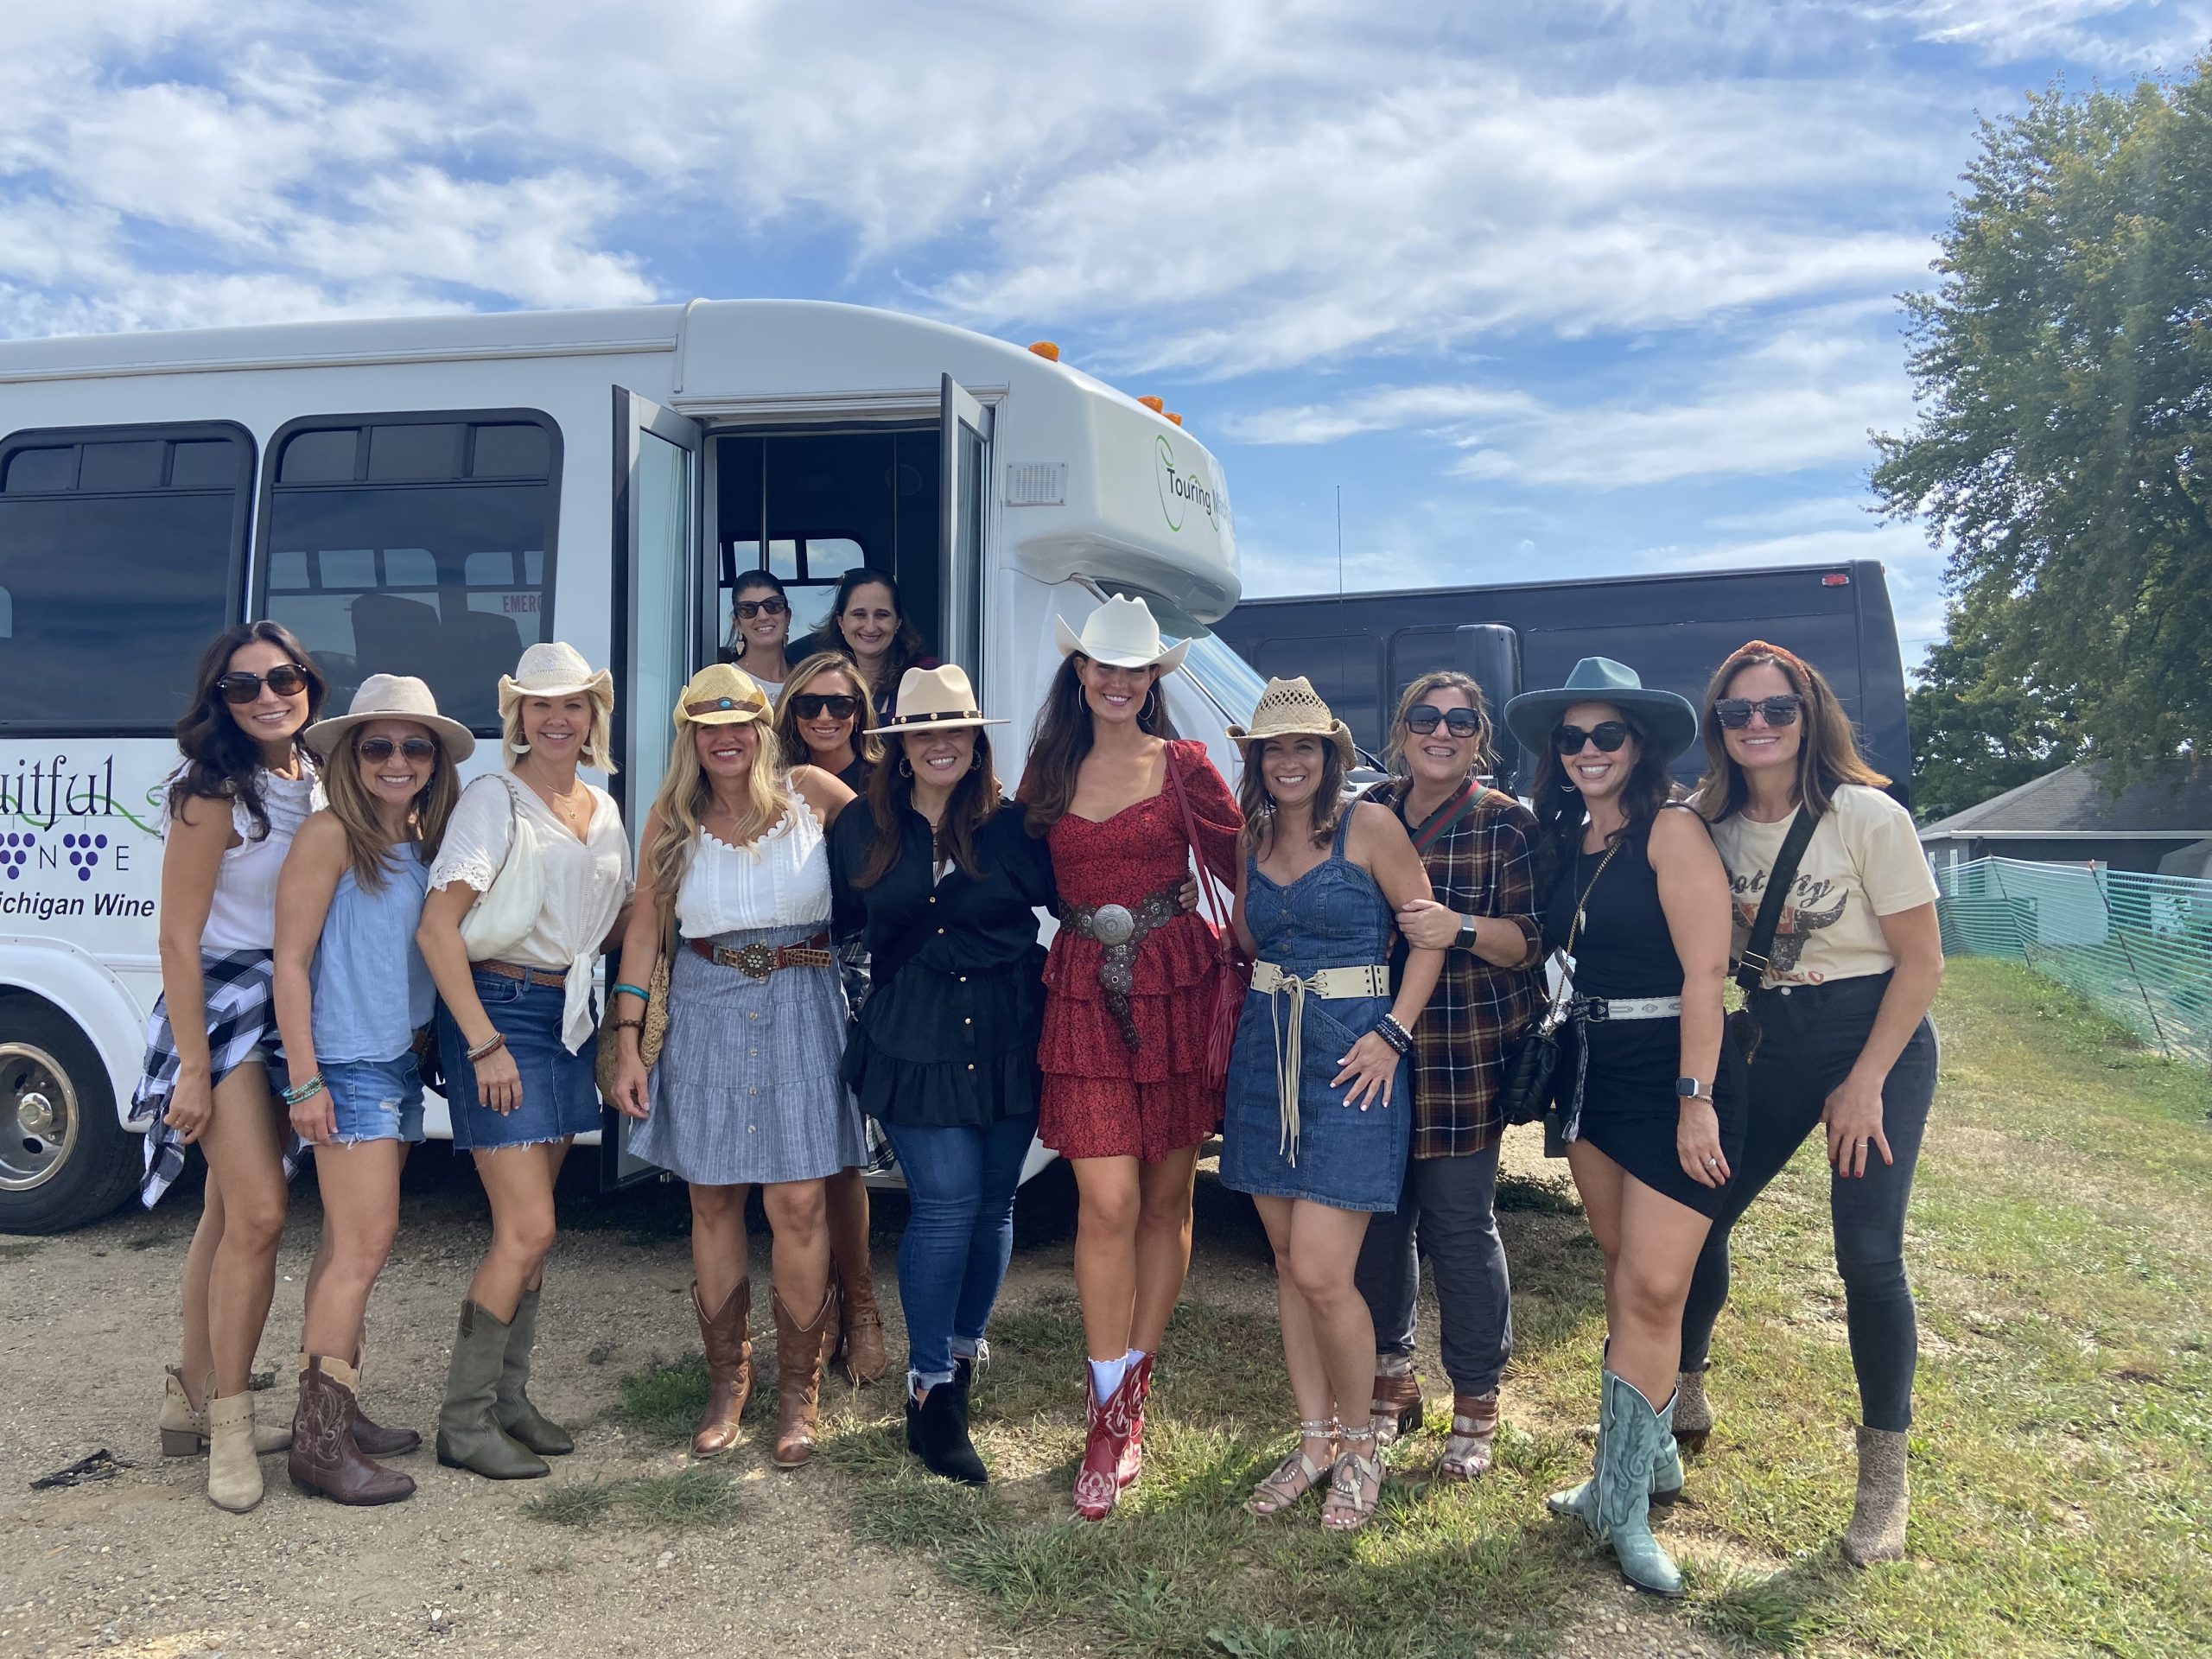 A group of women pose in front of the Fruitful Vine Vino Coach at a winery. It is summer and the women are dressed in country western styles with boots and cowboy hats. The sky is bright blue with clouds, and there is a green tree in the background.